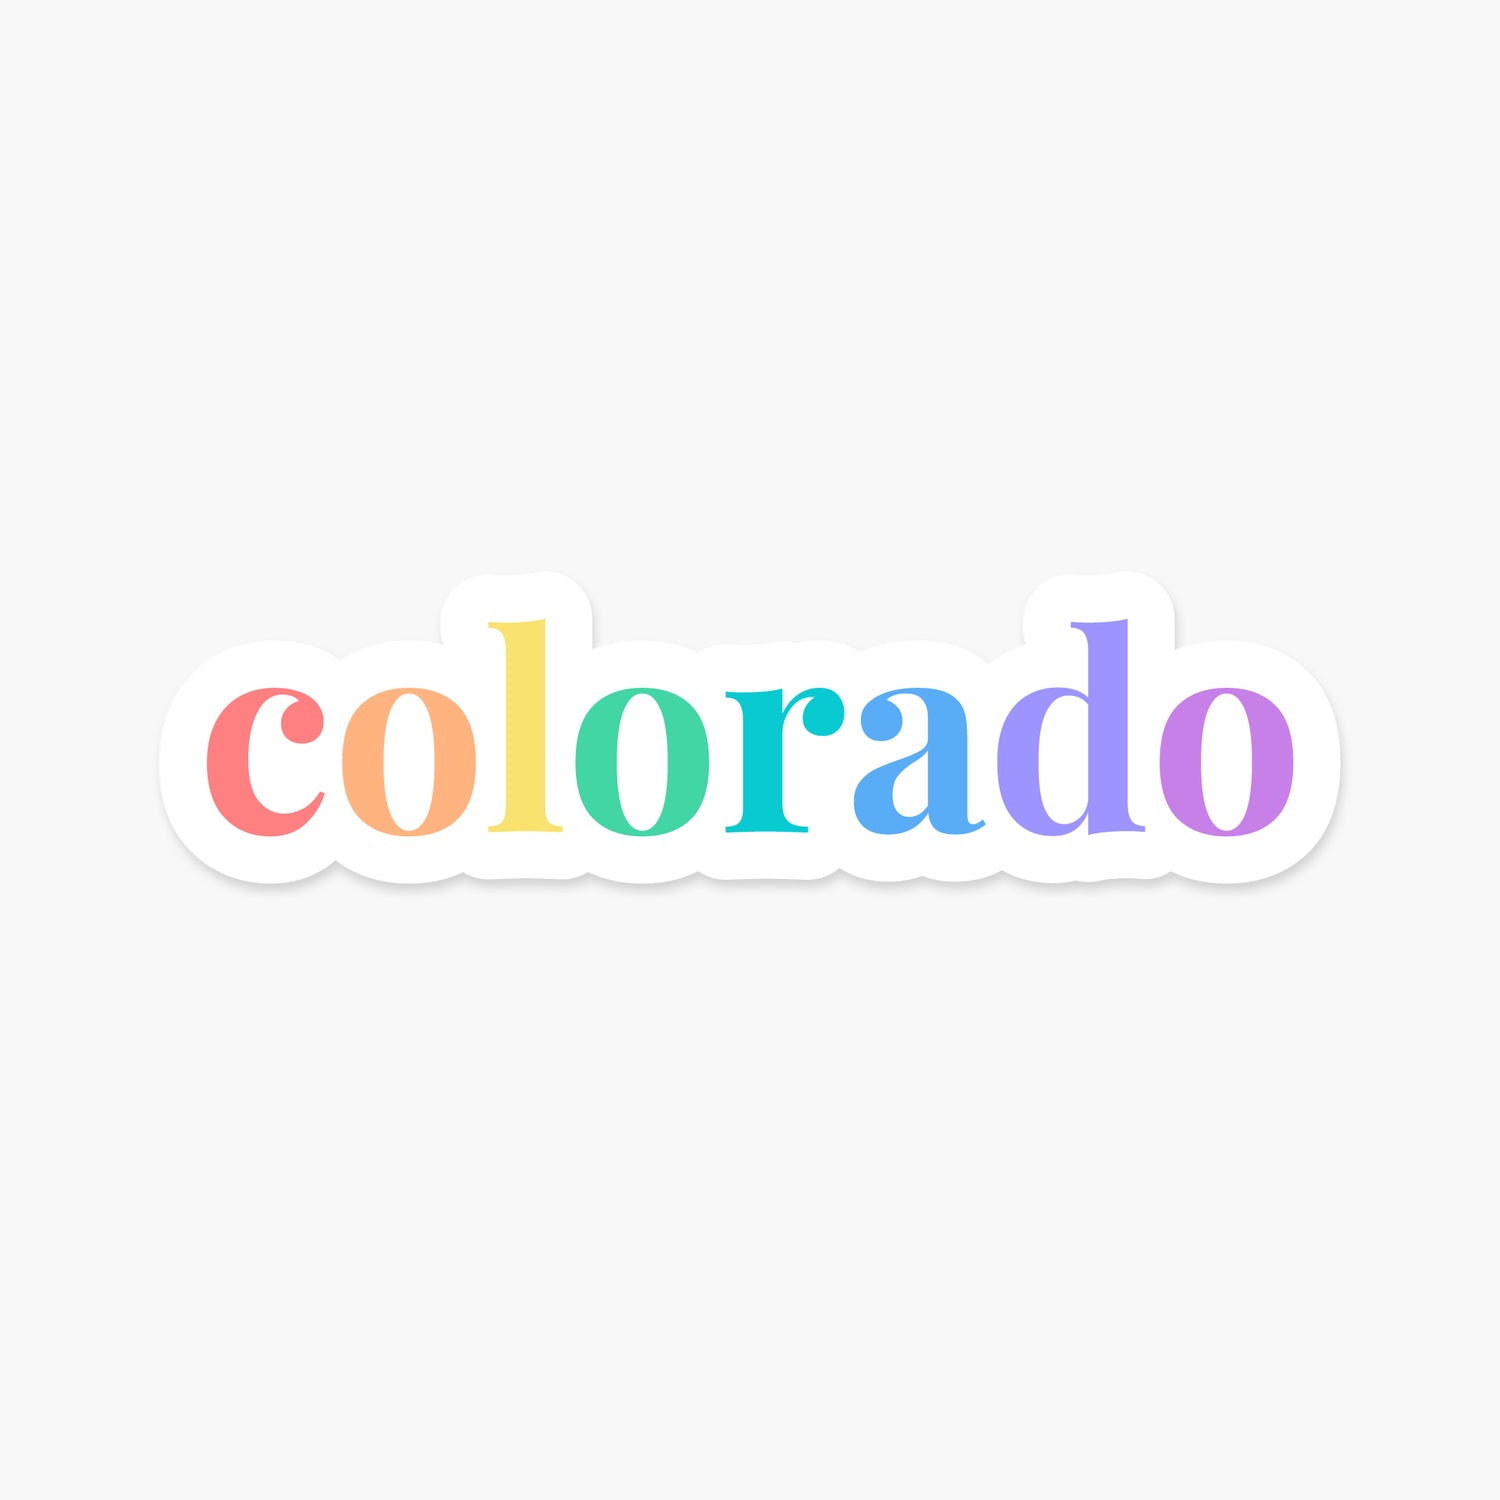 Colorado US State - Everyday Sticker | Footnotes Paper